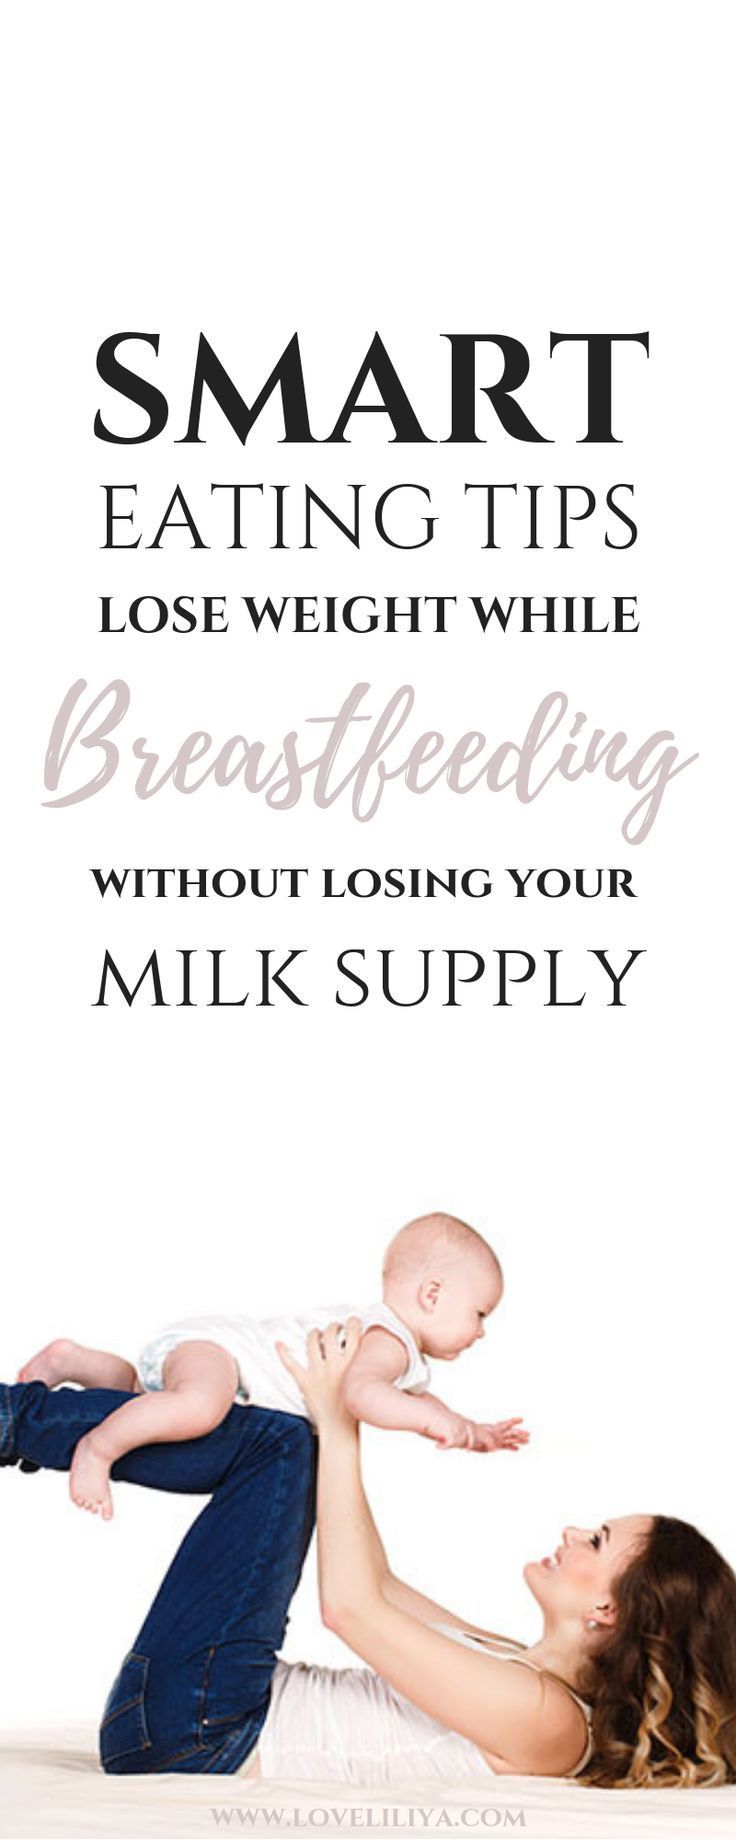 Breastfeeding Weight-Loss Without Harming Milk Supply -   17 fitness pregnancy weightloss
 ideas